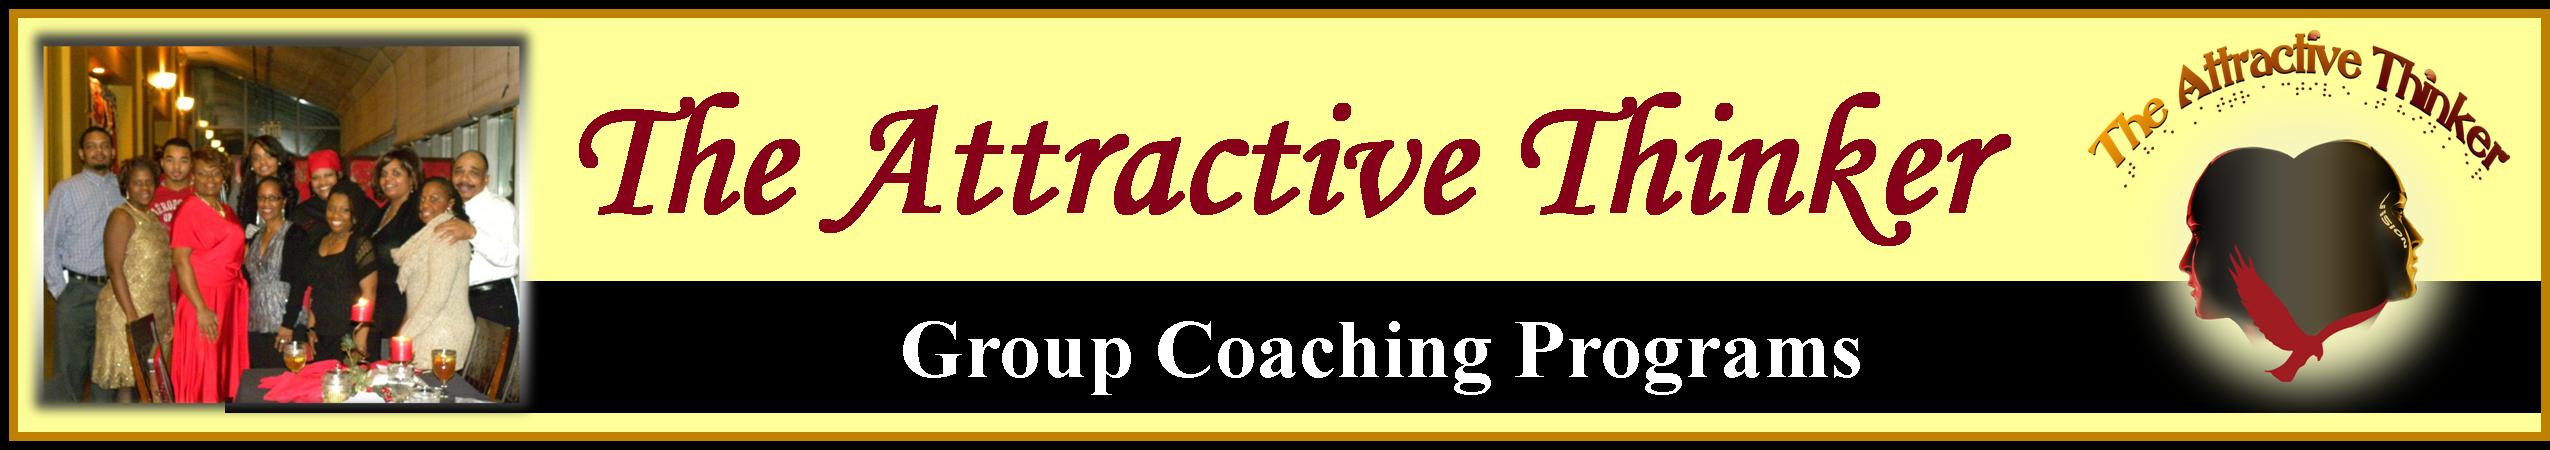 The Attractive Thinker Group Coaching Programs banner